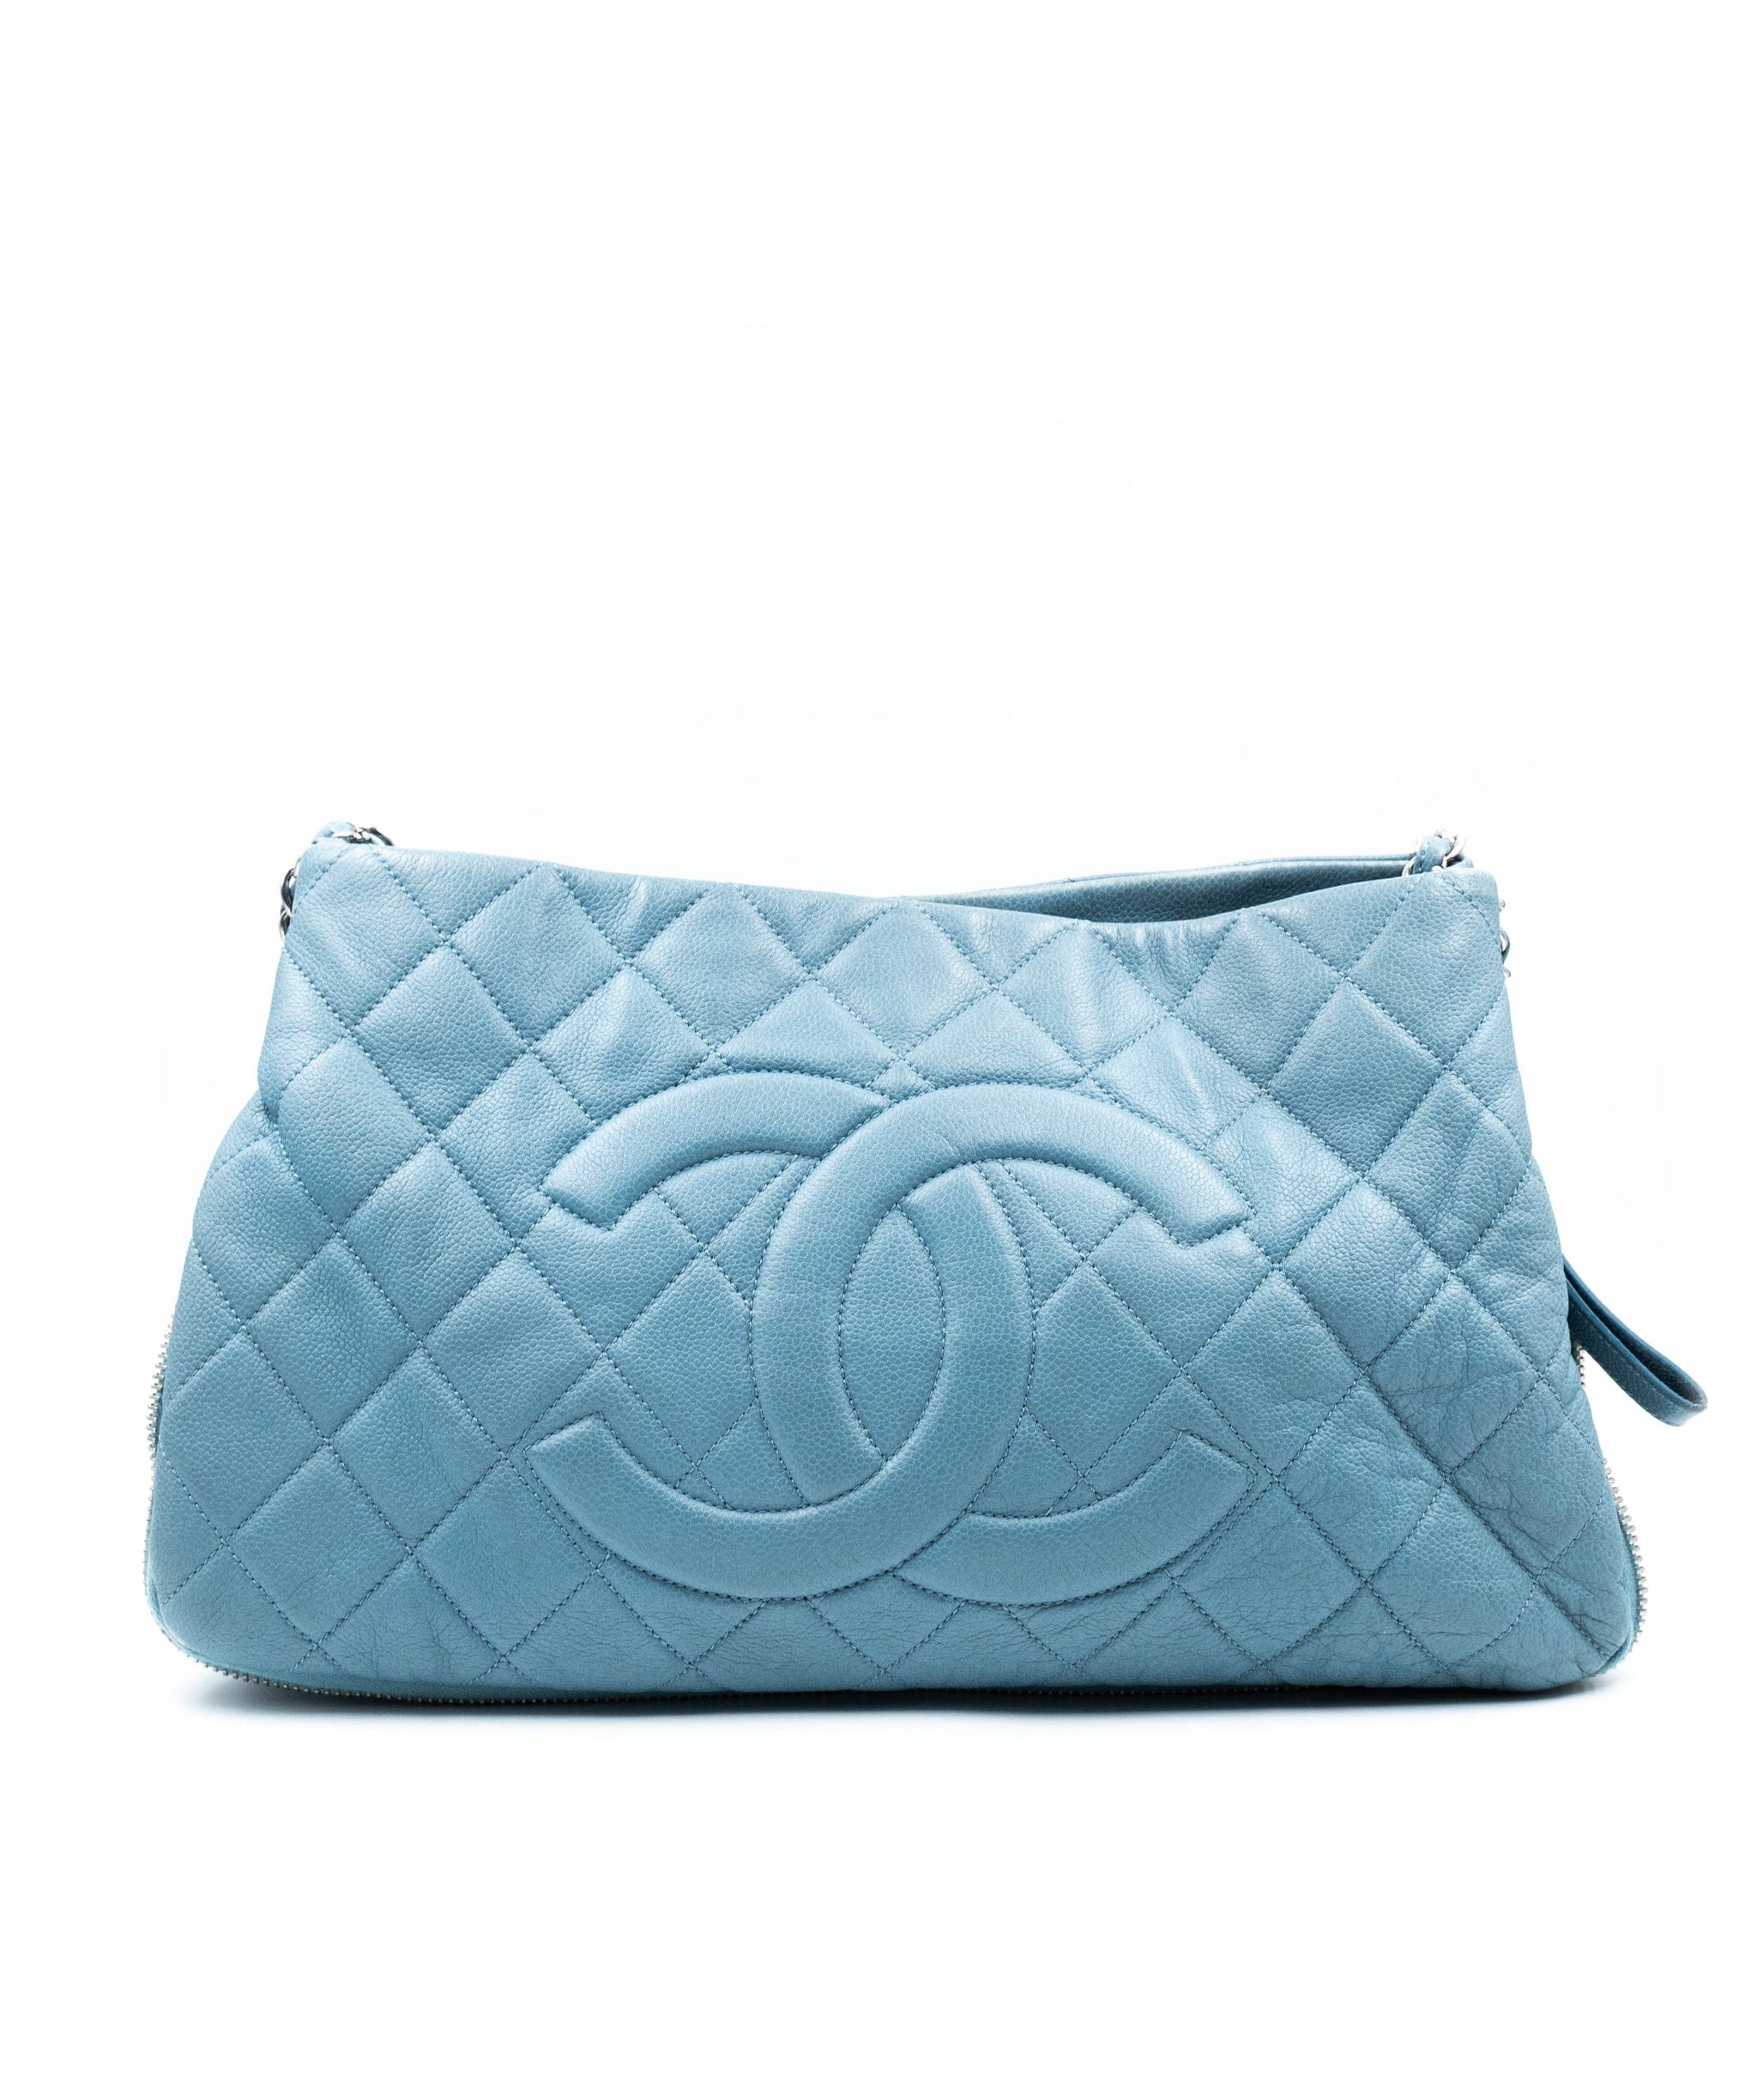 Chanel Chanel Blue CC Quilted Leather Tote Bag PHW  - AGL1991